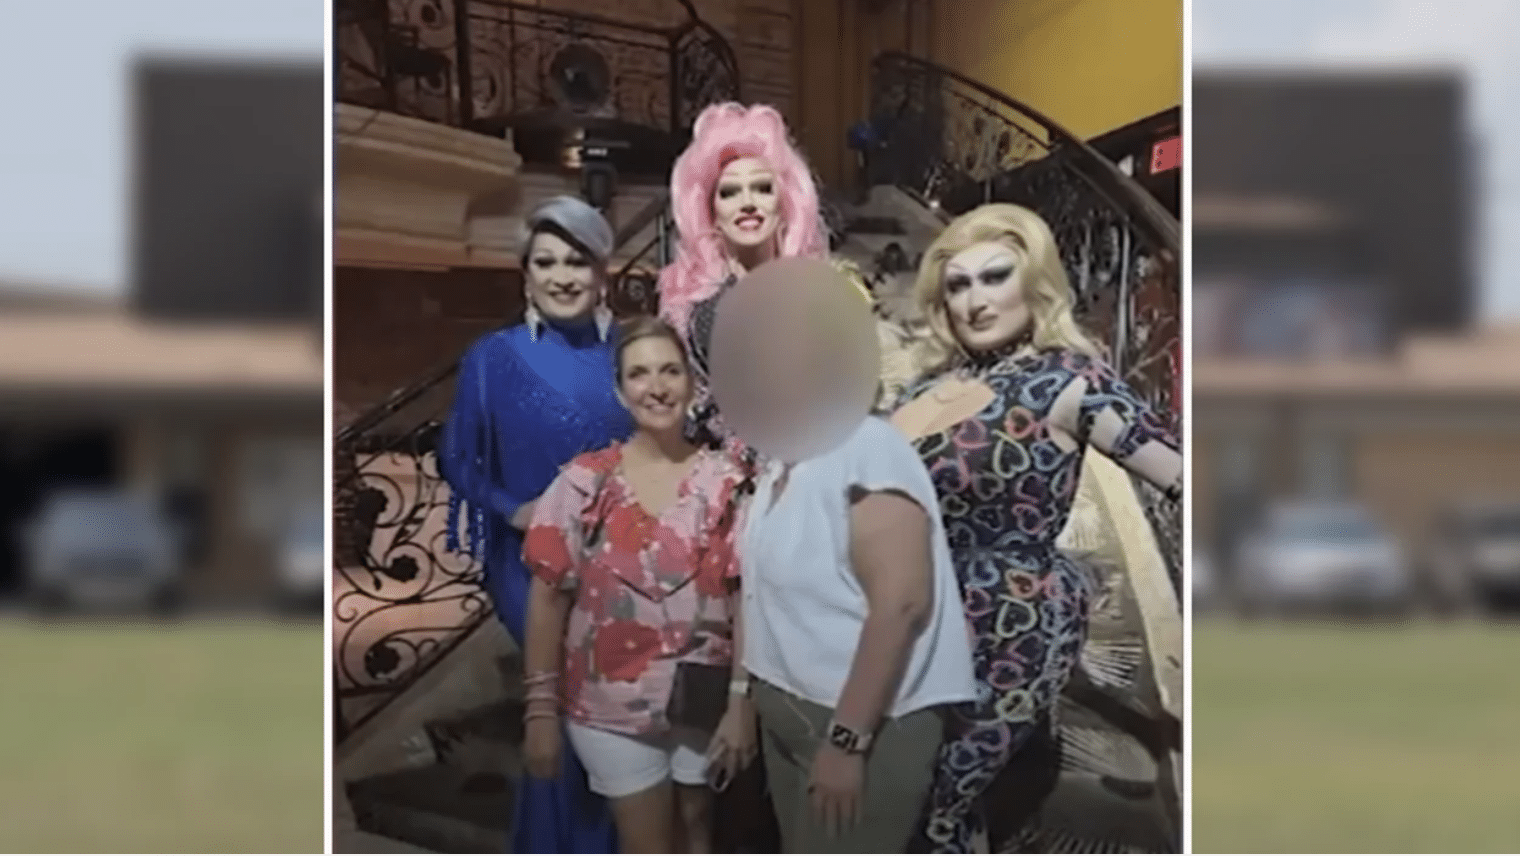 Christian school teachers fired attending drag queen show, posting videos about it on Facebook